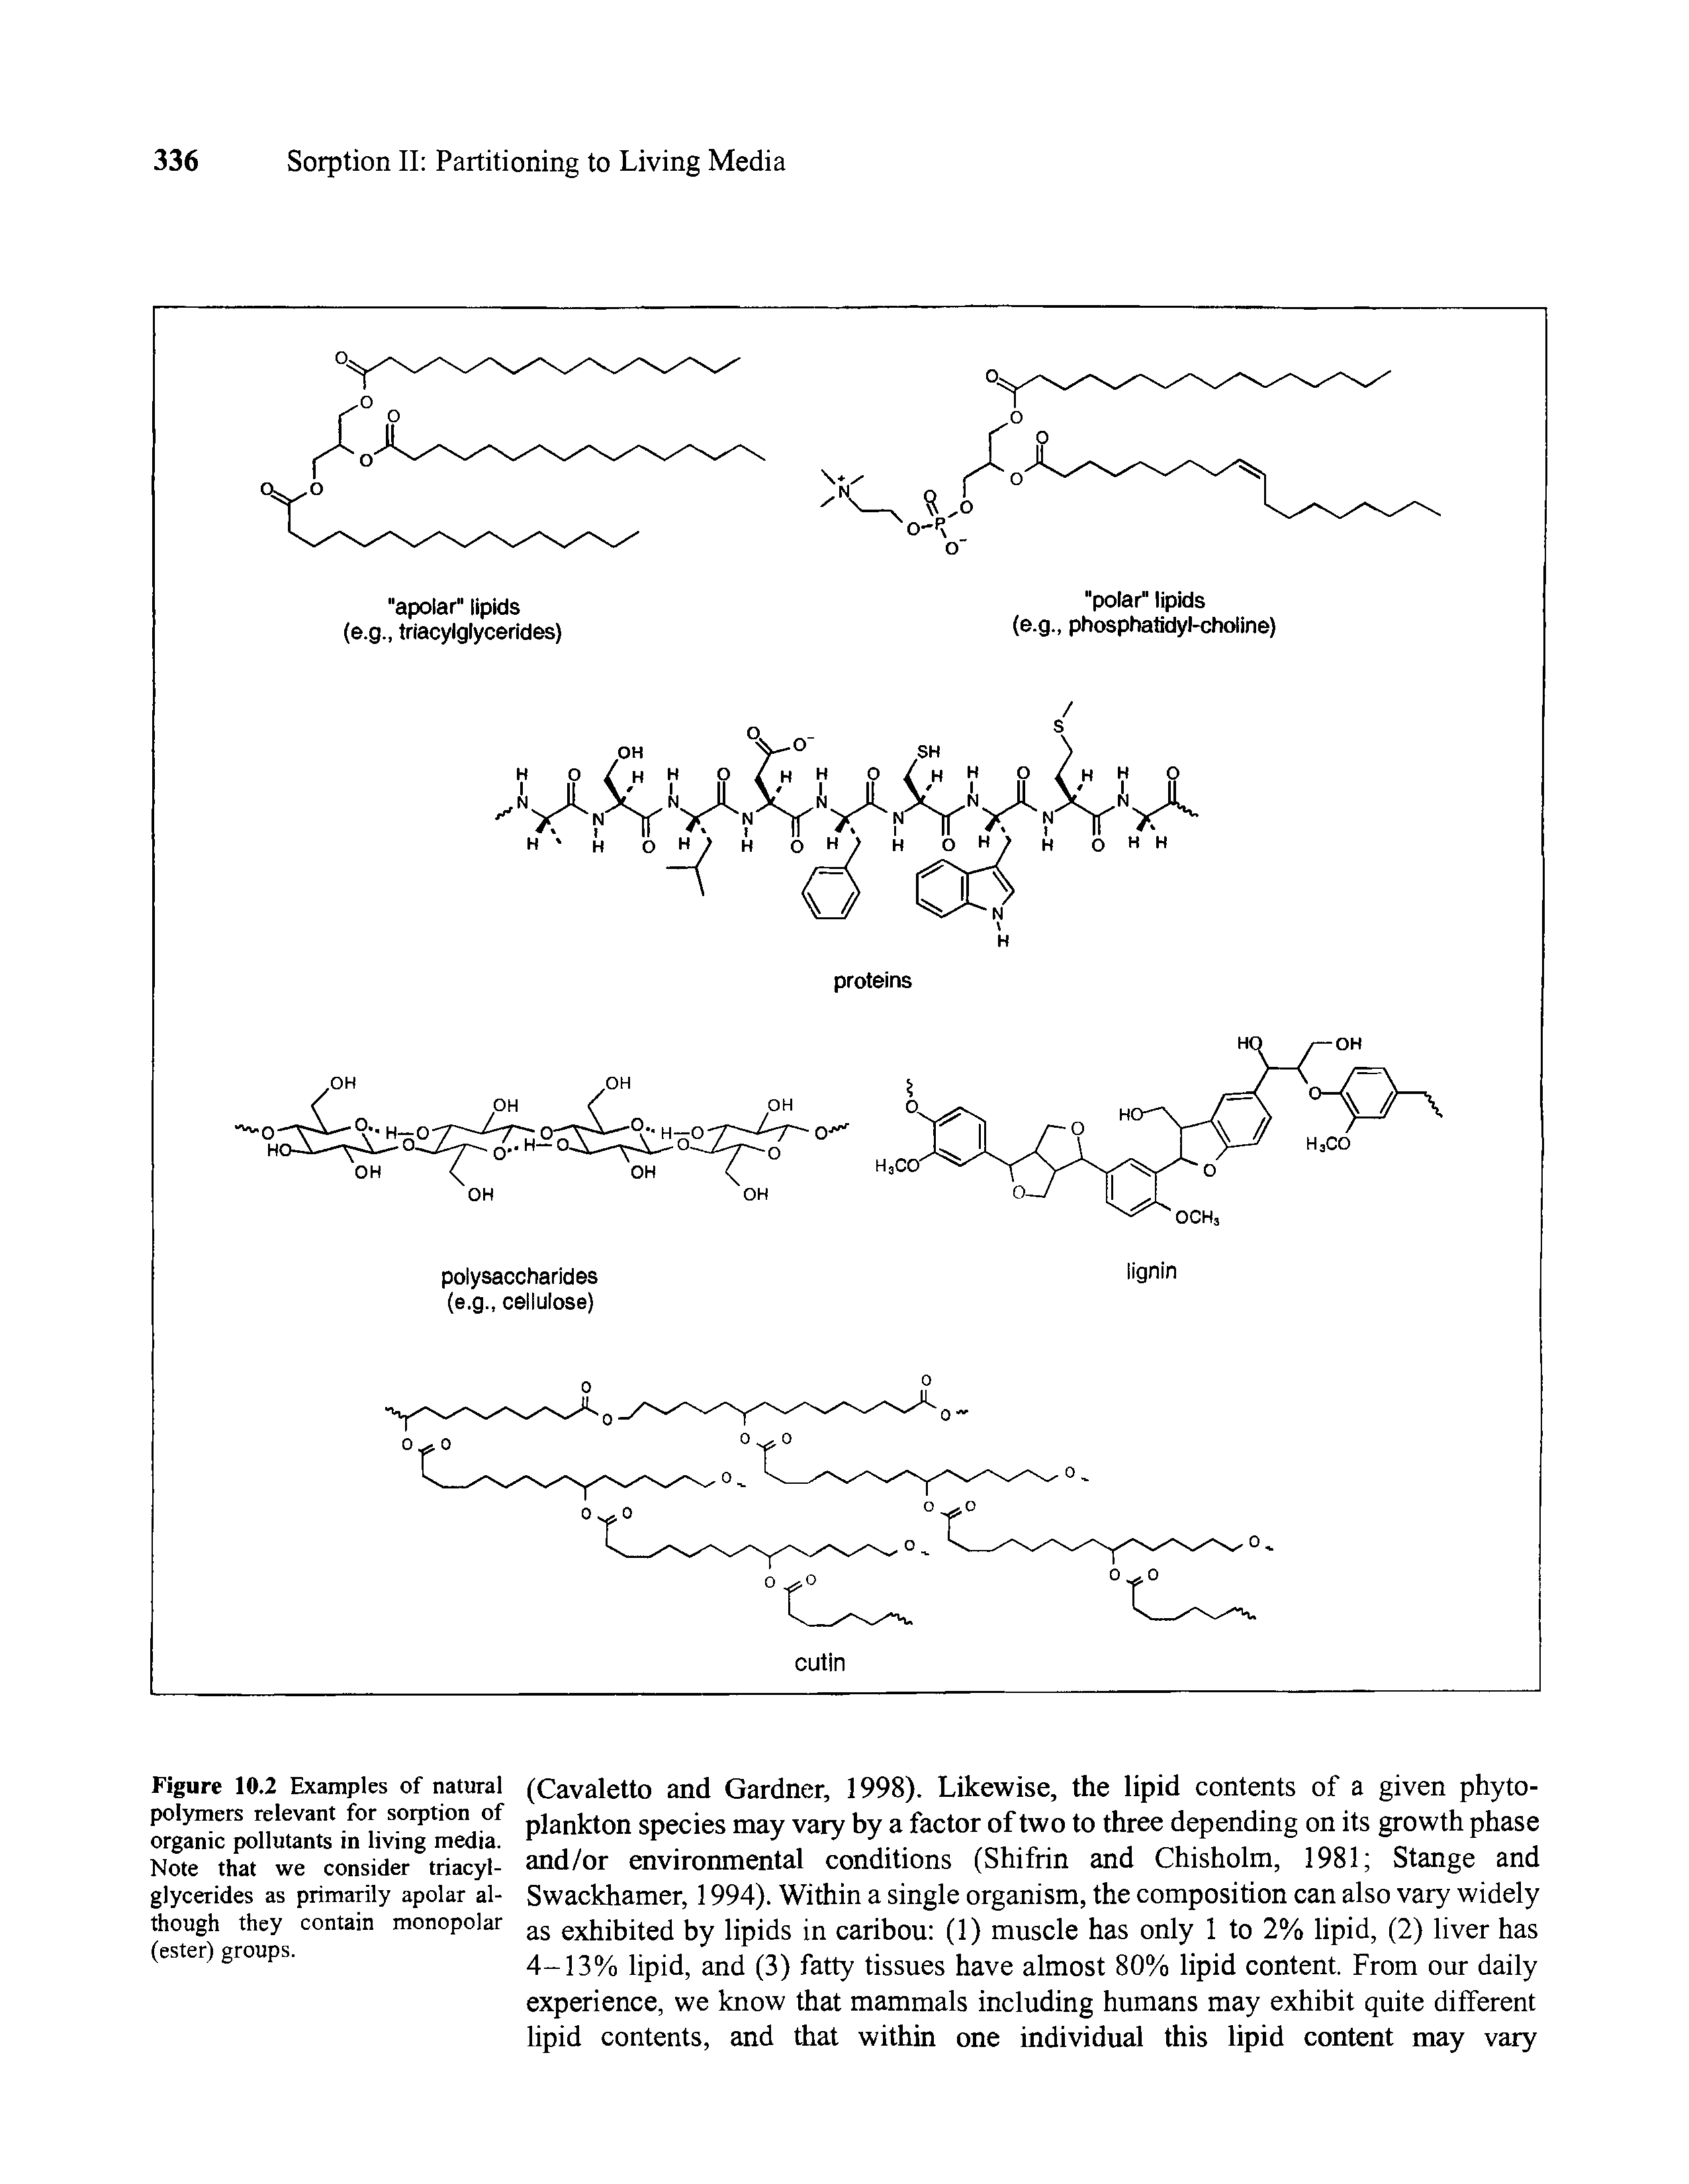 Figure 10.2 Examples of natural polymers relevant for sorption of organic pollutants in living media. Note that we consider triacyl-glycerides as primarily apolar although they contain monopolar (ester) groups.